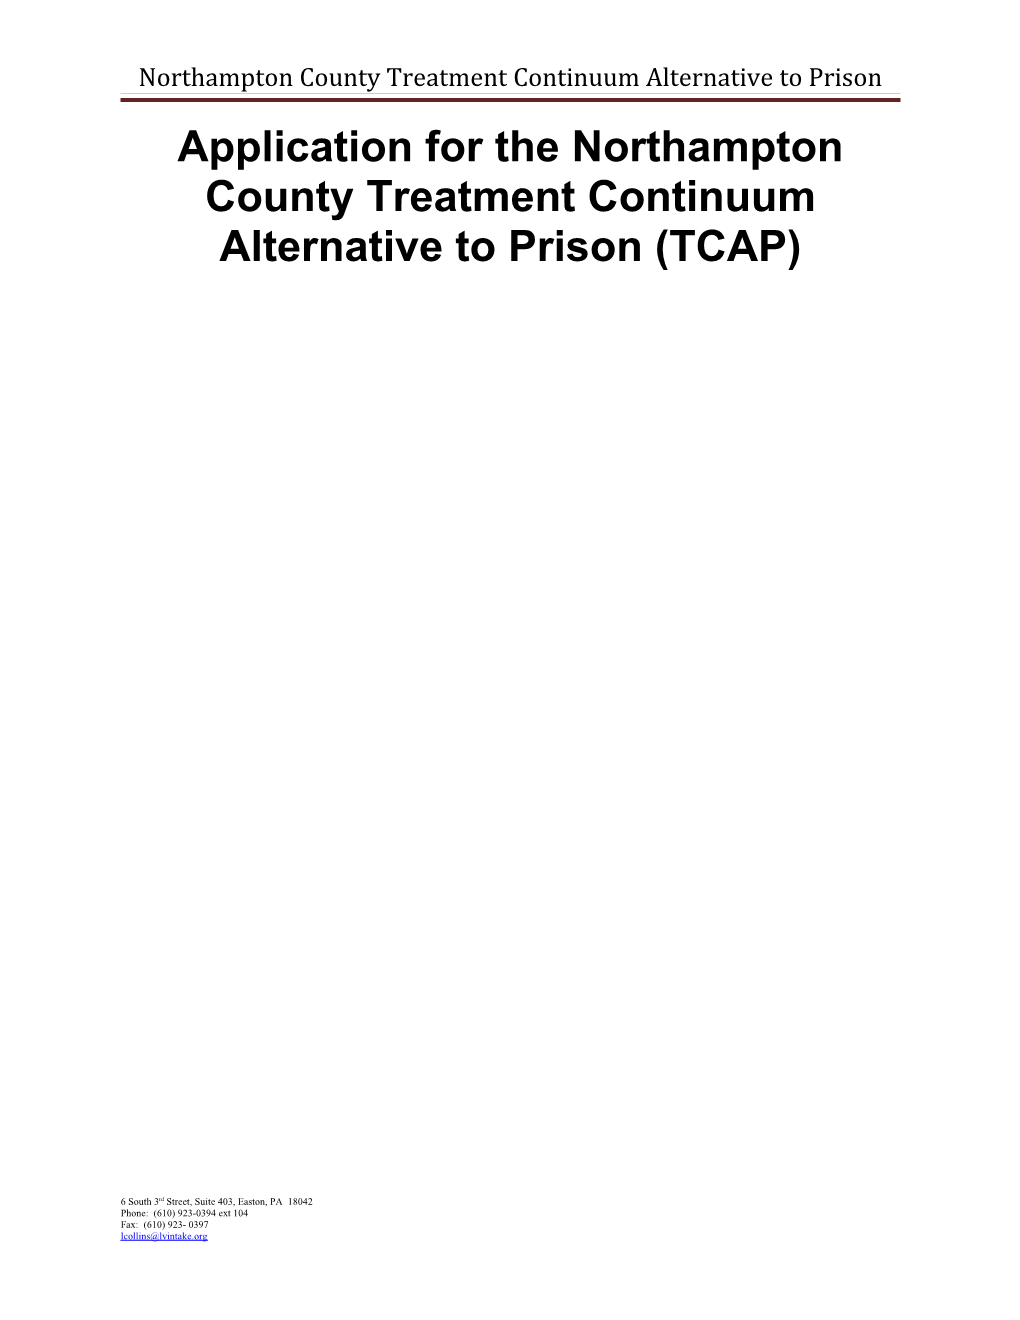 Application for the Northampton County Treatment Continuum Alternative to Prison (TCAP)